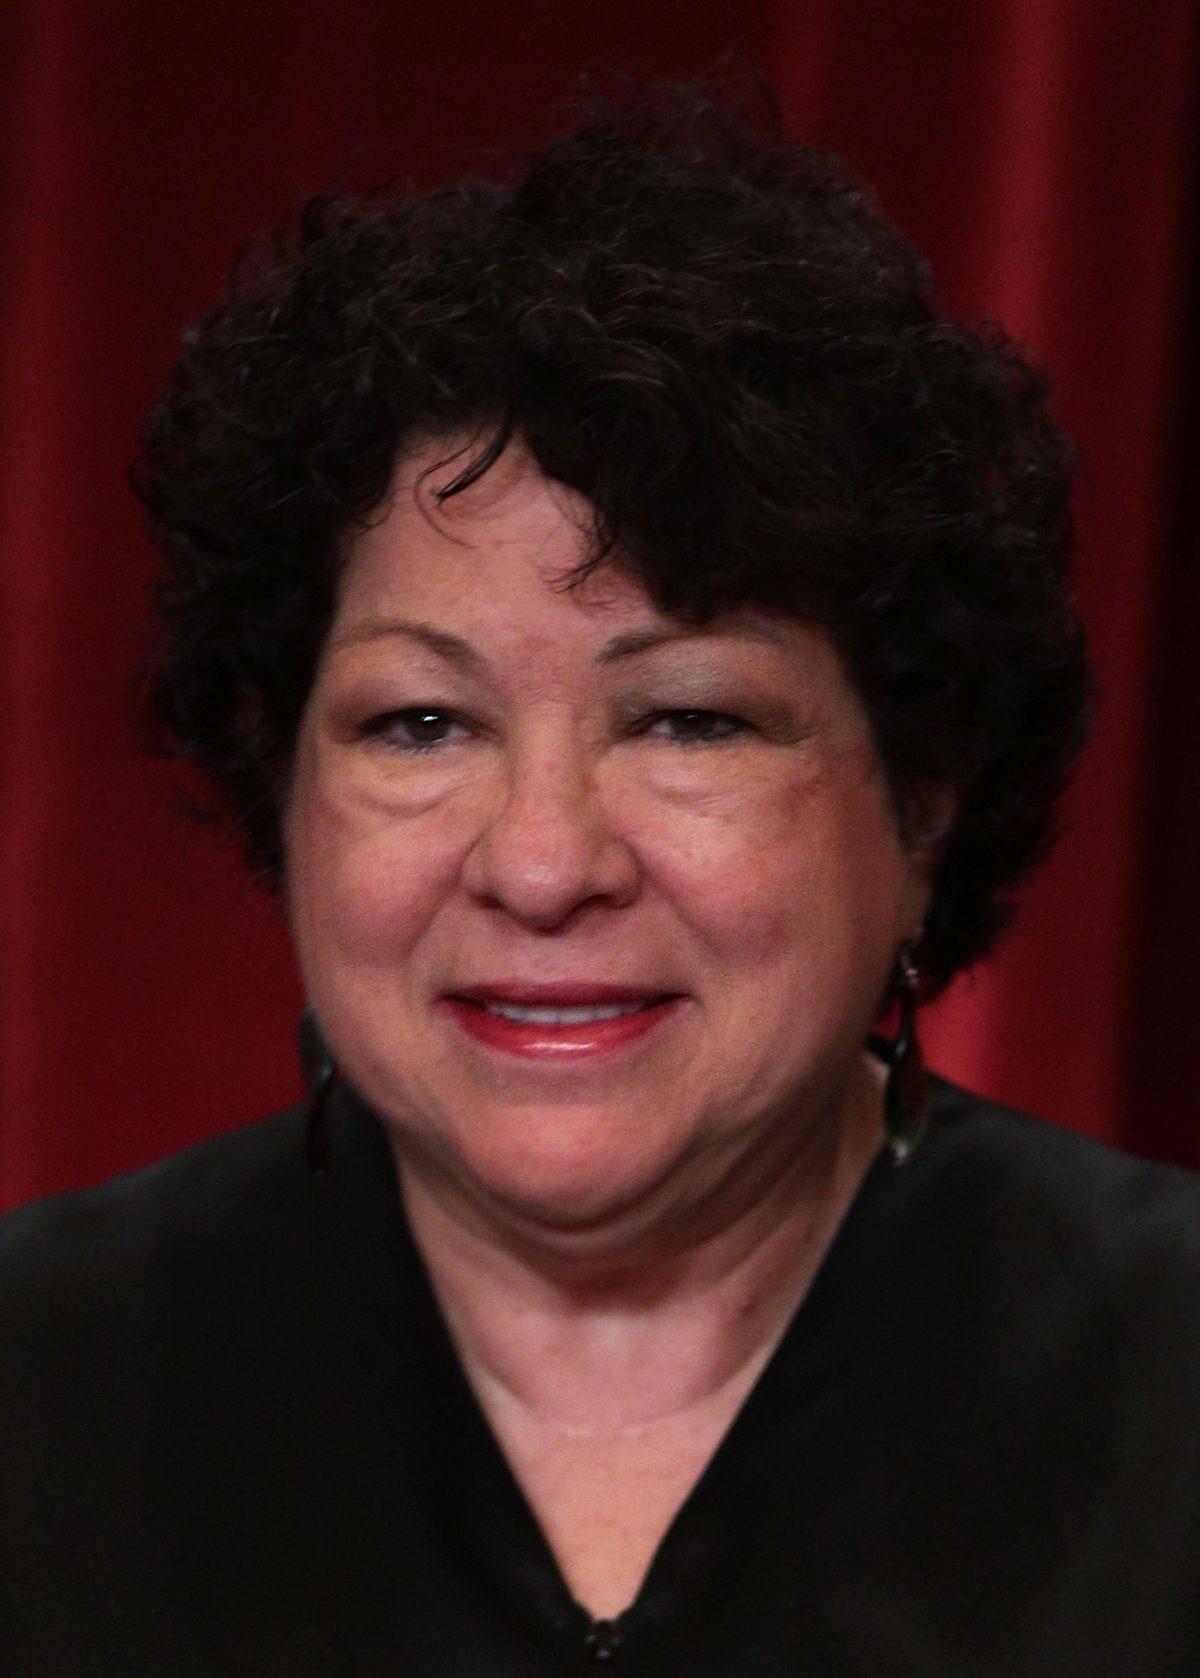  Supreme Court Associate Justice Sonia Sotomayor in the East Conference Room of the Supreme Court in Washington on June 1, 2017. (Alex Wong/Getty Images)